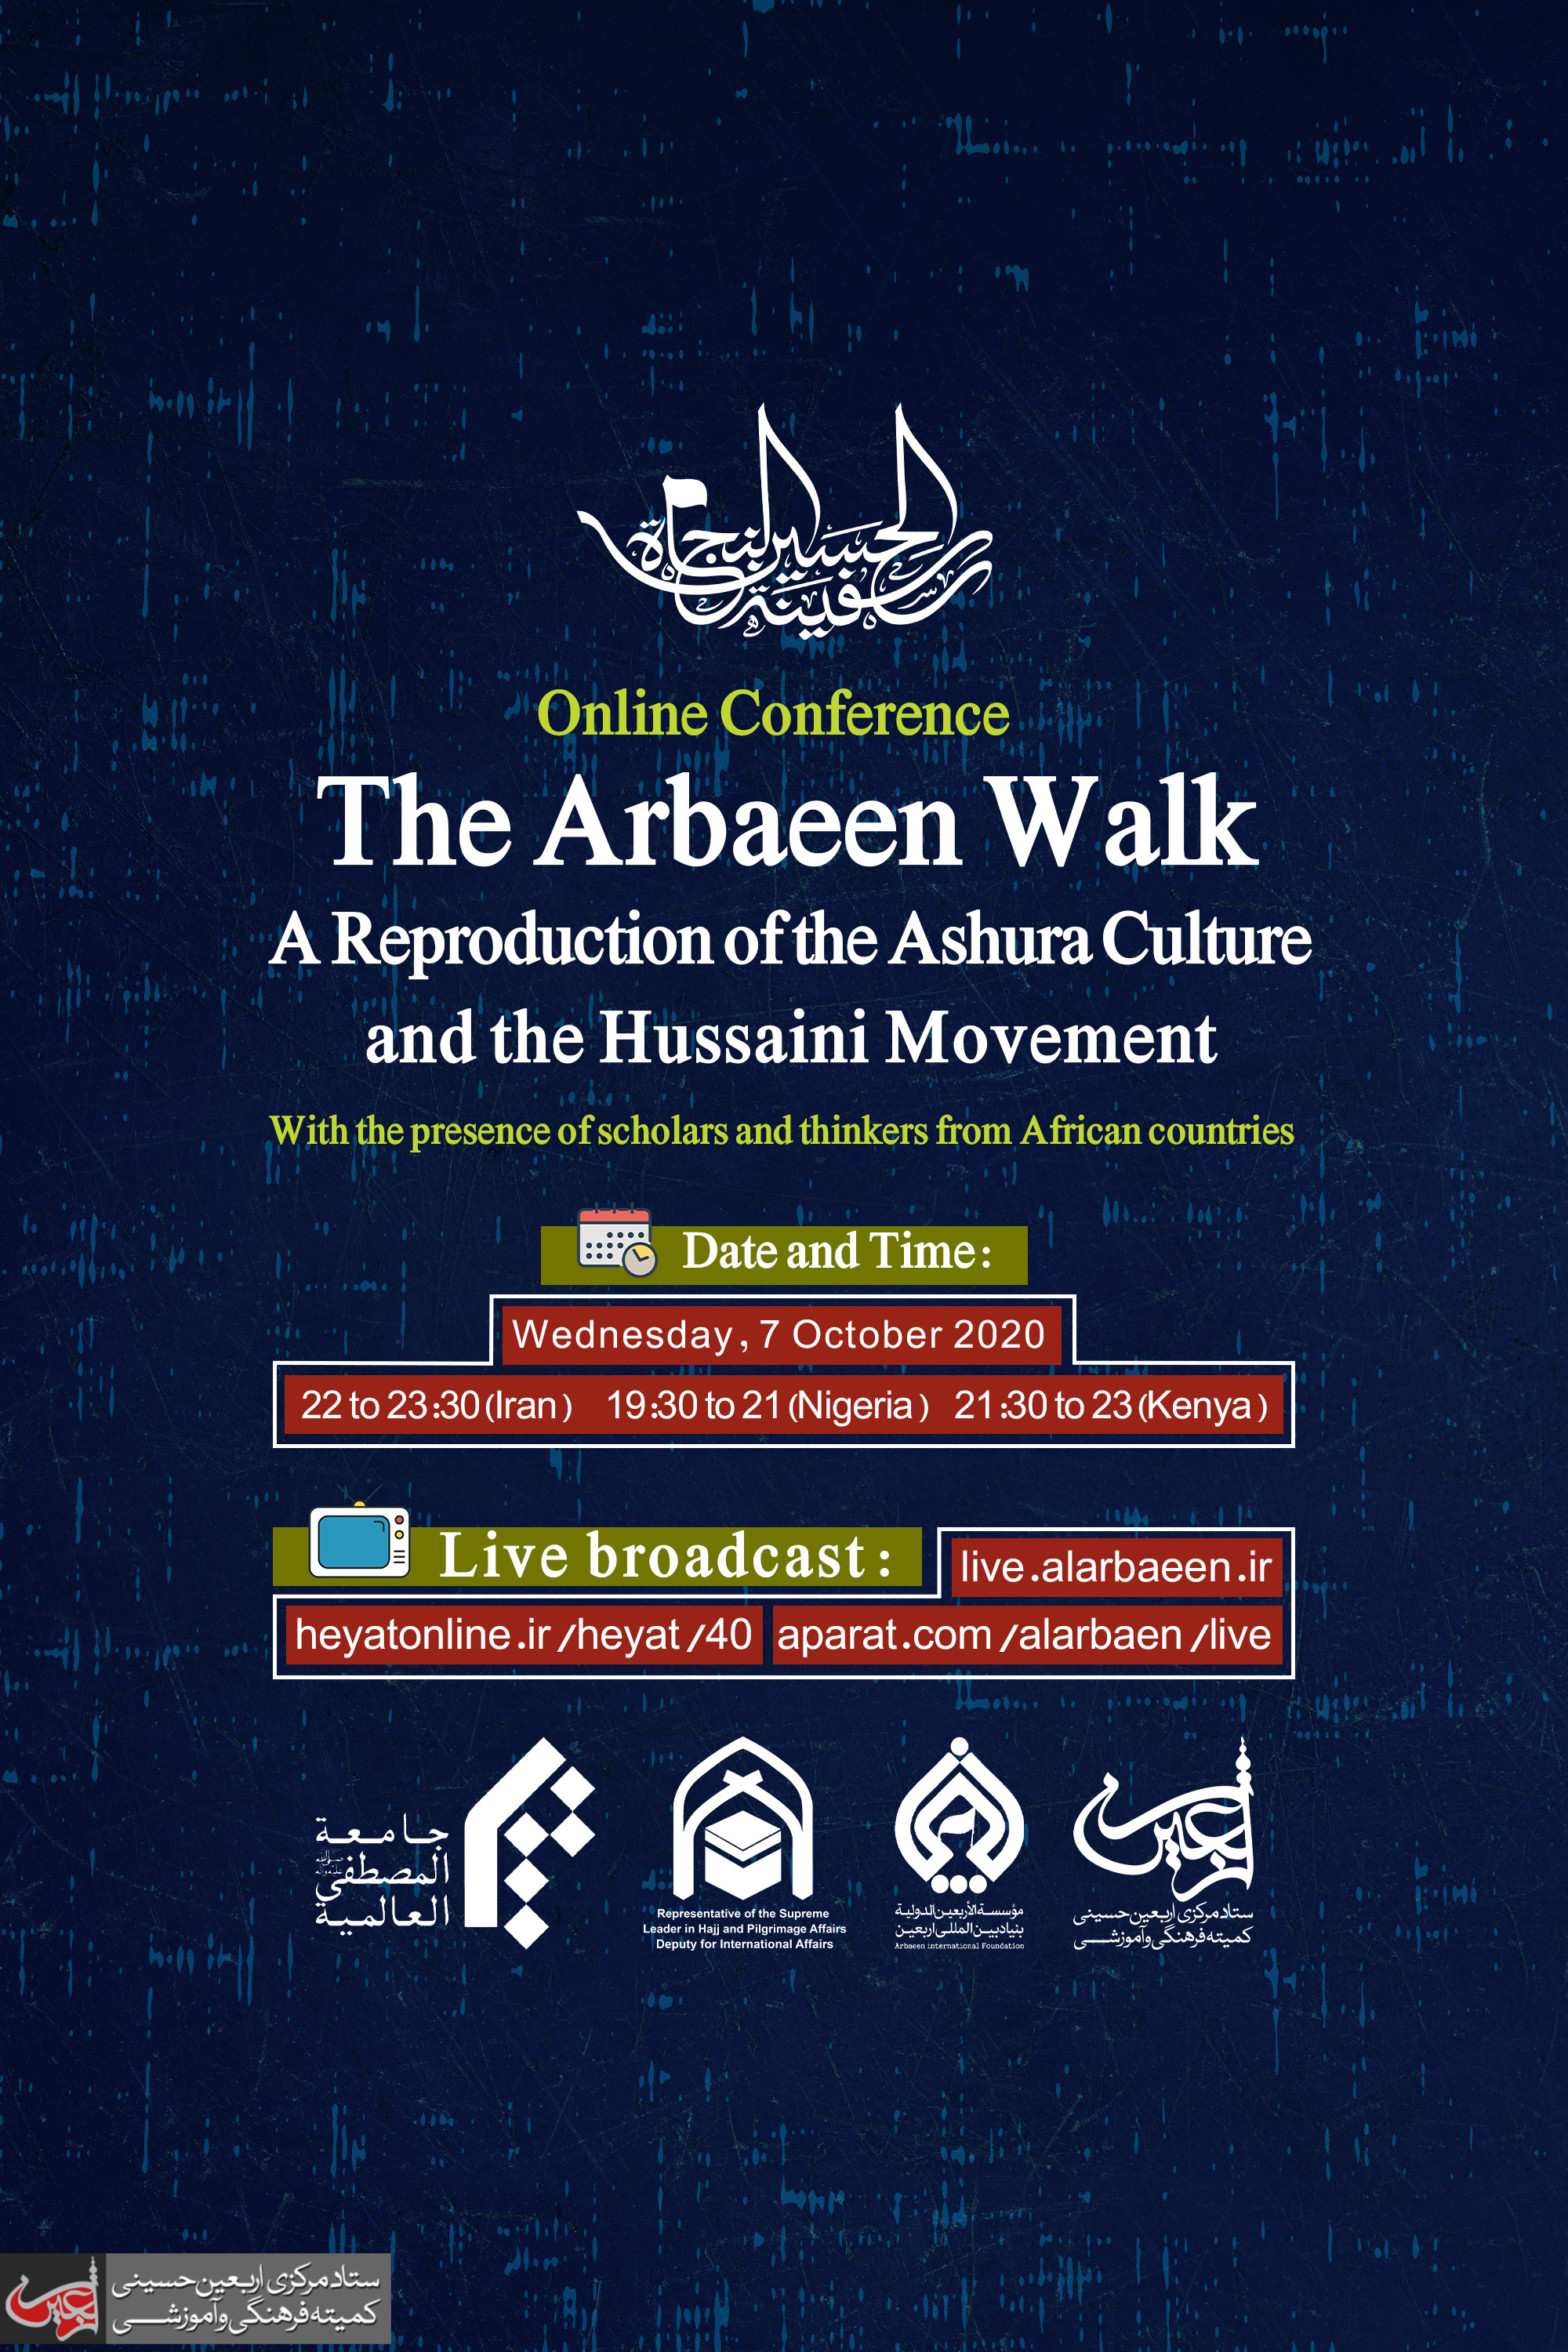 The Arbaeen Walk; a reproduction of the culture of Ashura and the Hussaini Movement